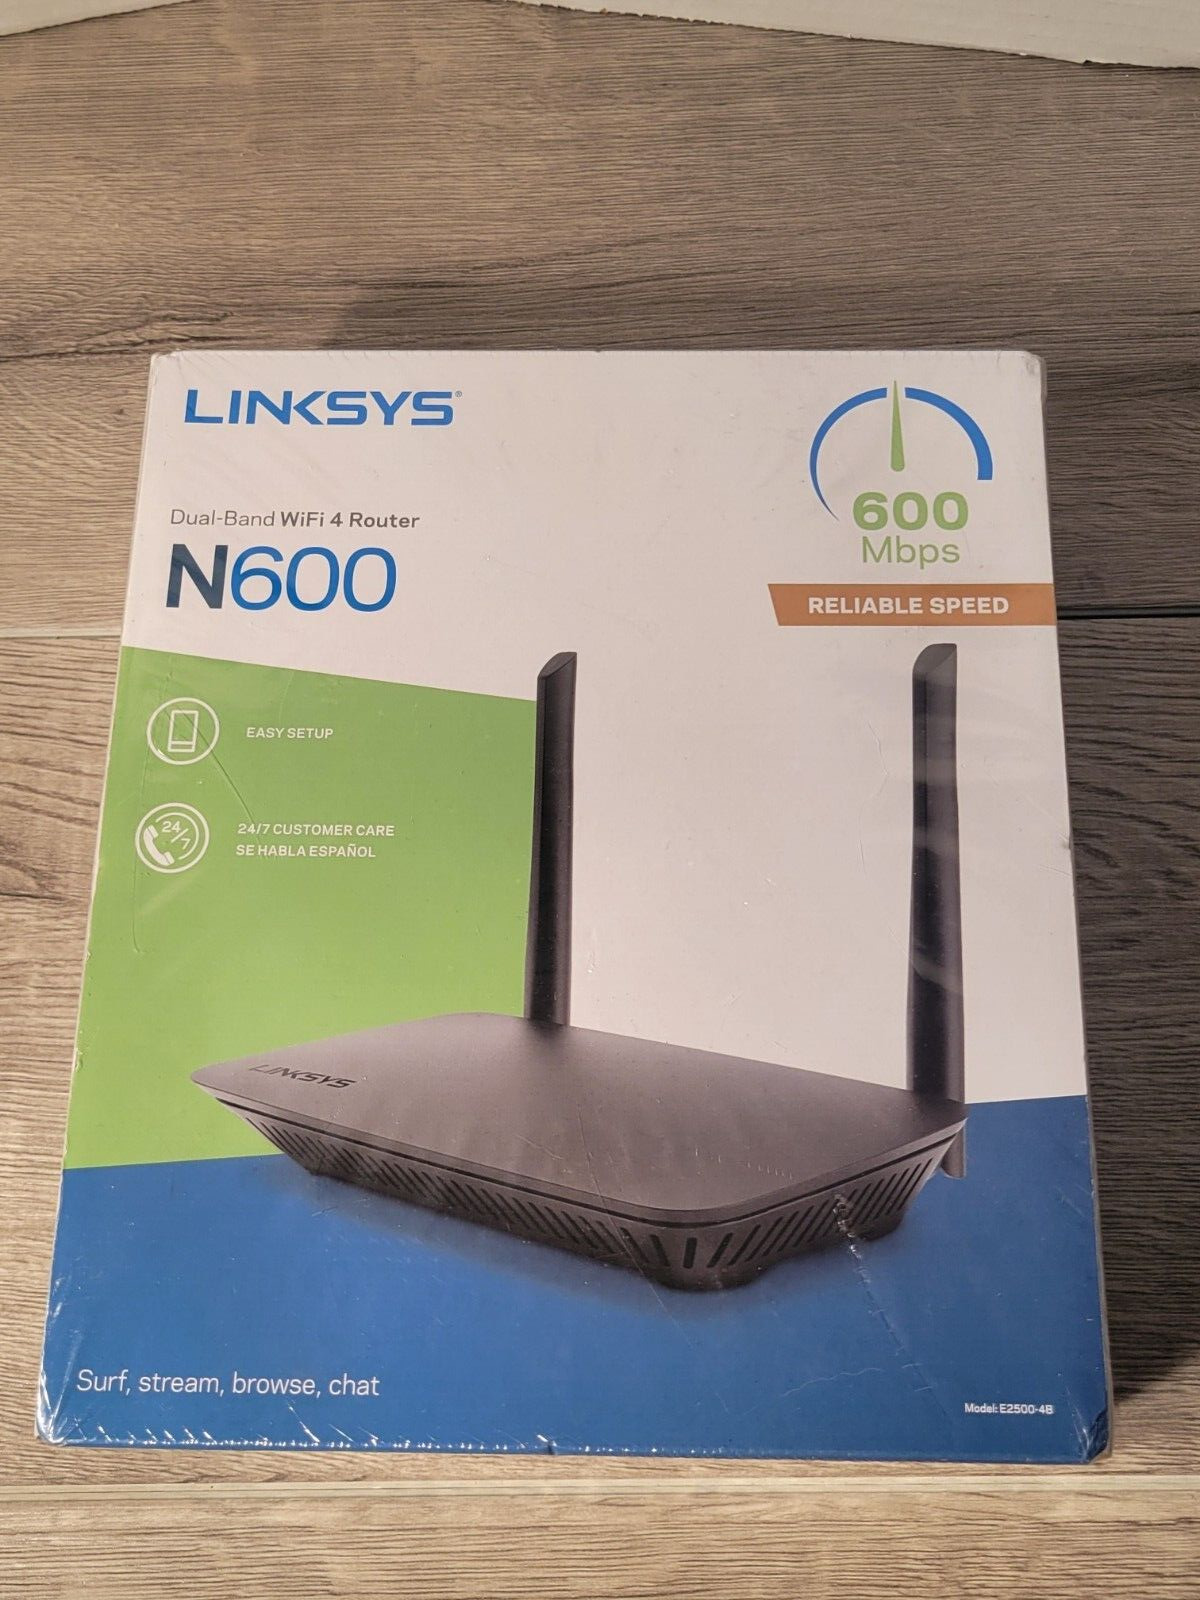 Linksys N600 Dual-Band WiFi 4 Router E2500-4B NEW SEALED